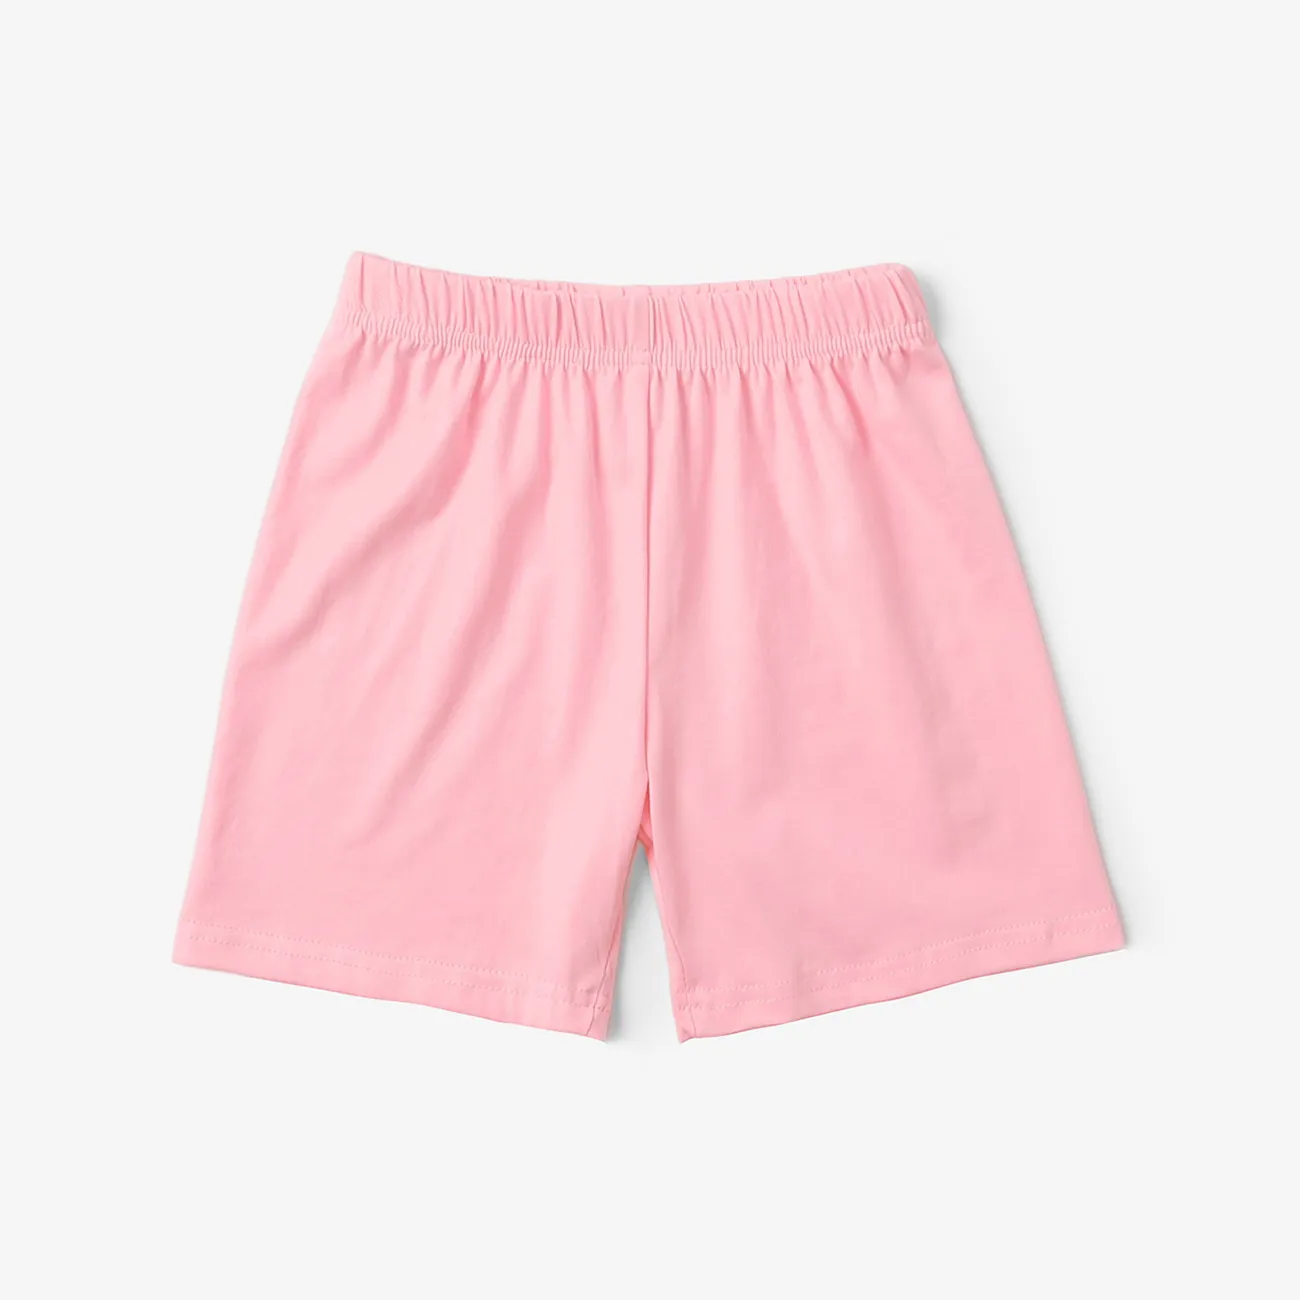 Toddler Boy/Girl 2pcs Cotton Solid Color Tee and Shorts Set Pink big image 1